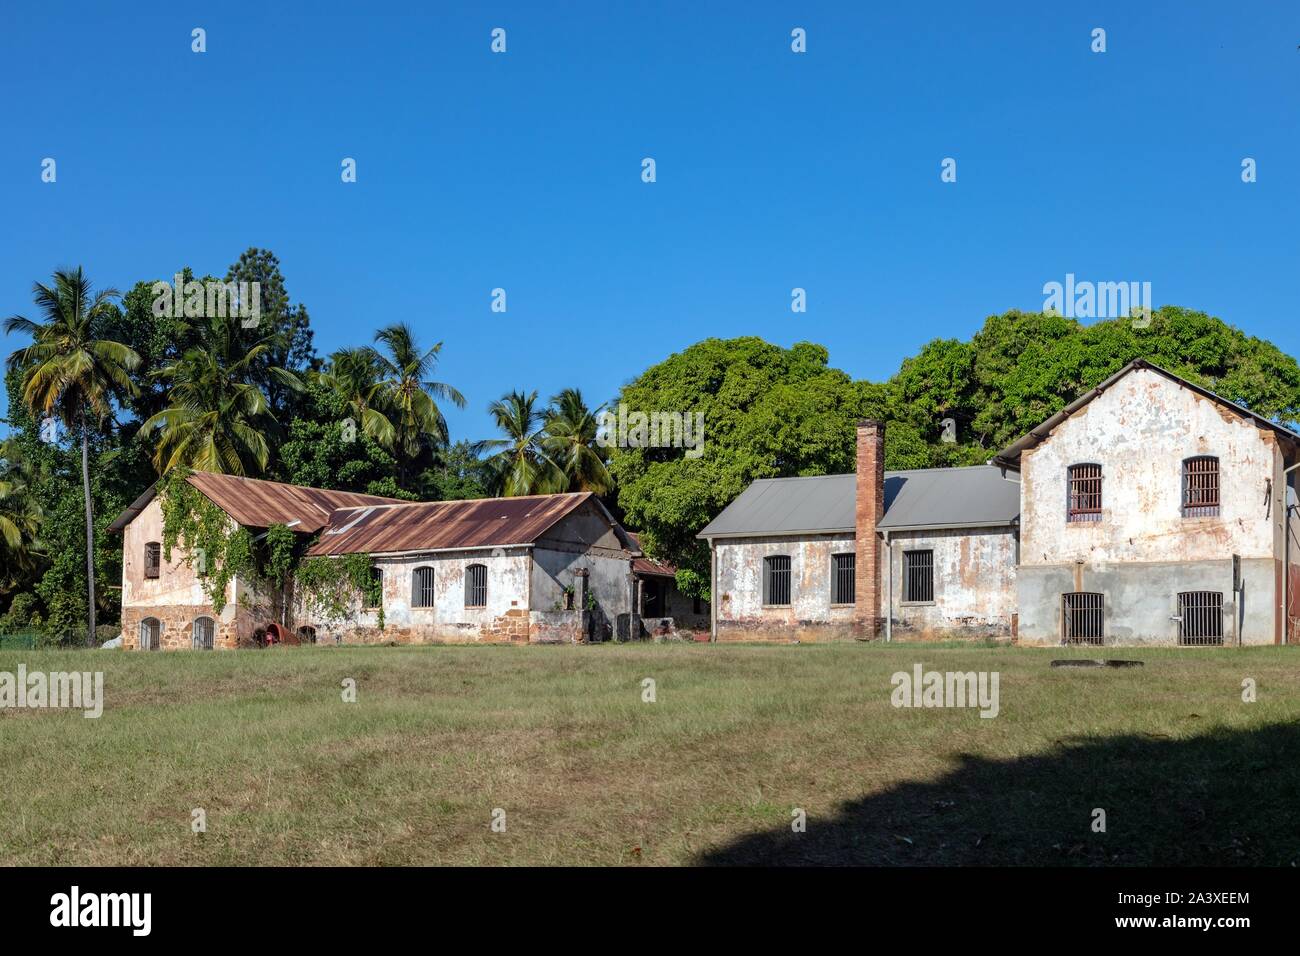 THE FORMER PENAL COLONY'S BUILDINGS, THE CONVICTS' WORKSHOP, ILE ROYALE, SALVATION'S ISLANDS, KOUROU, FRENCH GUIANA, OVERSEAS DEPARTMENT, SOUTH AMERICA, FRANCE Stock Photo